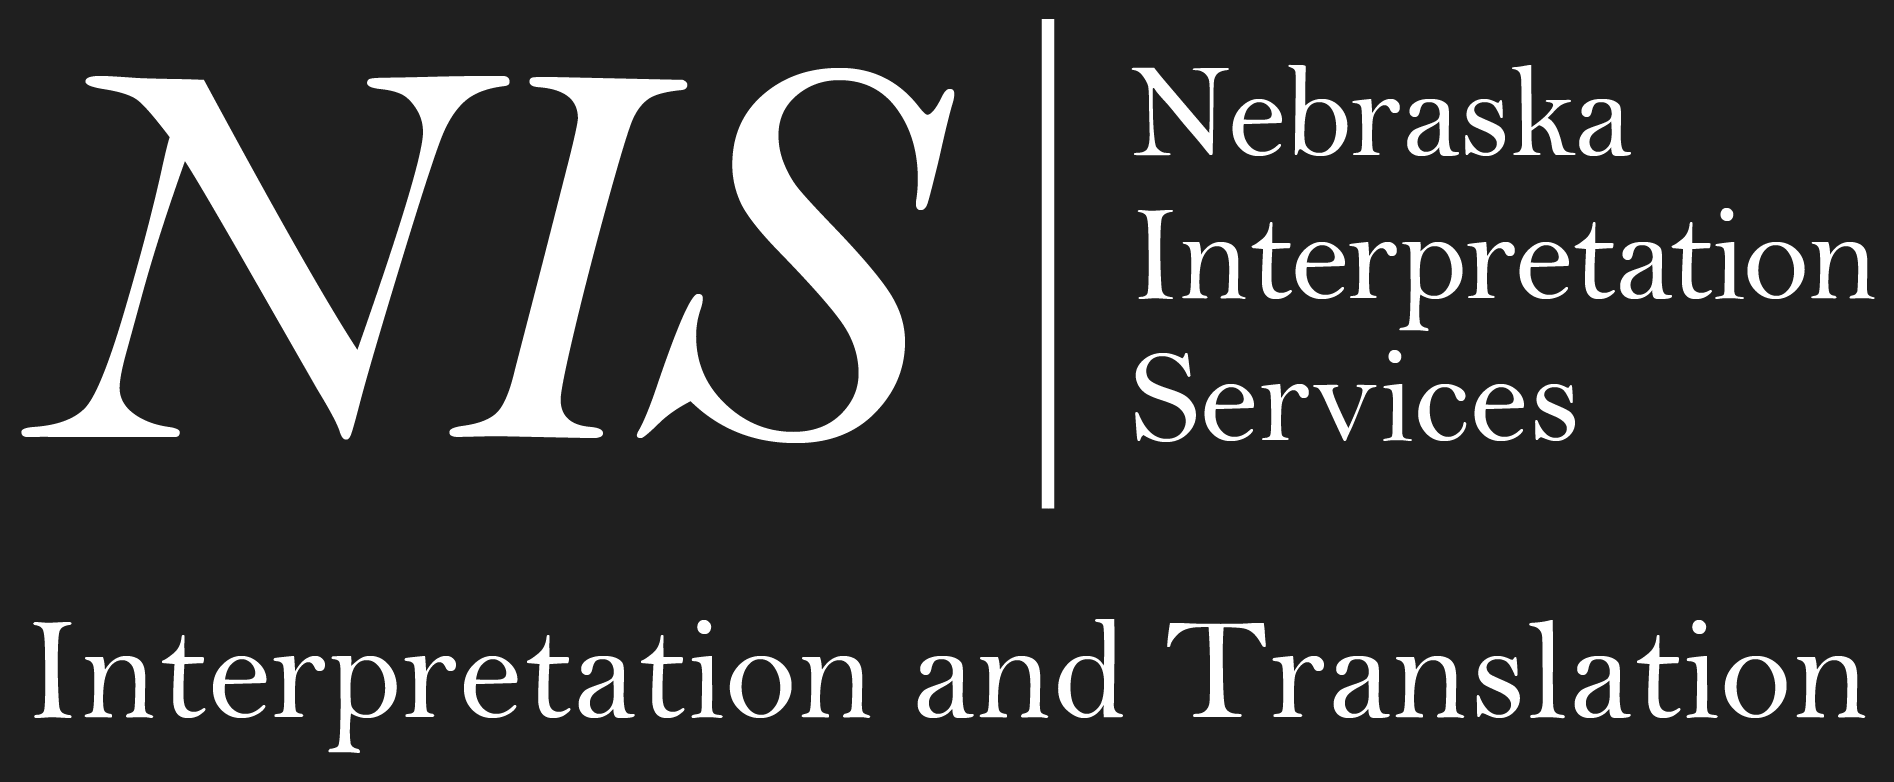 Nebraska Interpretation Services is committed to delivering personalized communication services to community members. As a locally-owned agency, they recognize the importance of cross-cultural communication and work diligently to foster understanding among individuals who speak diverse languages.